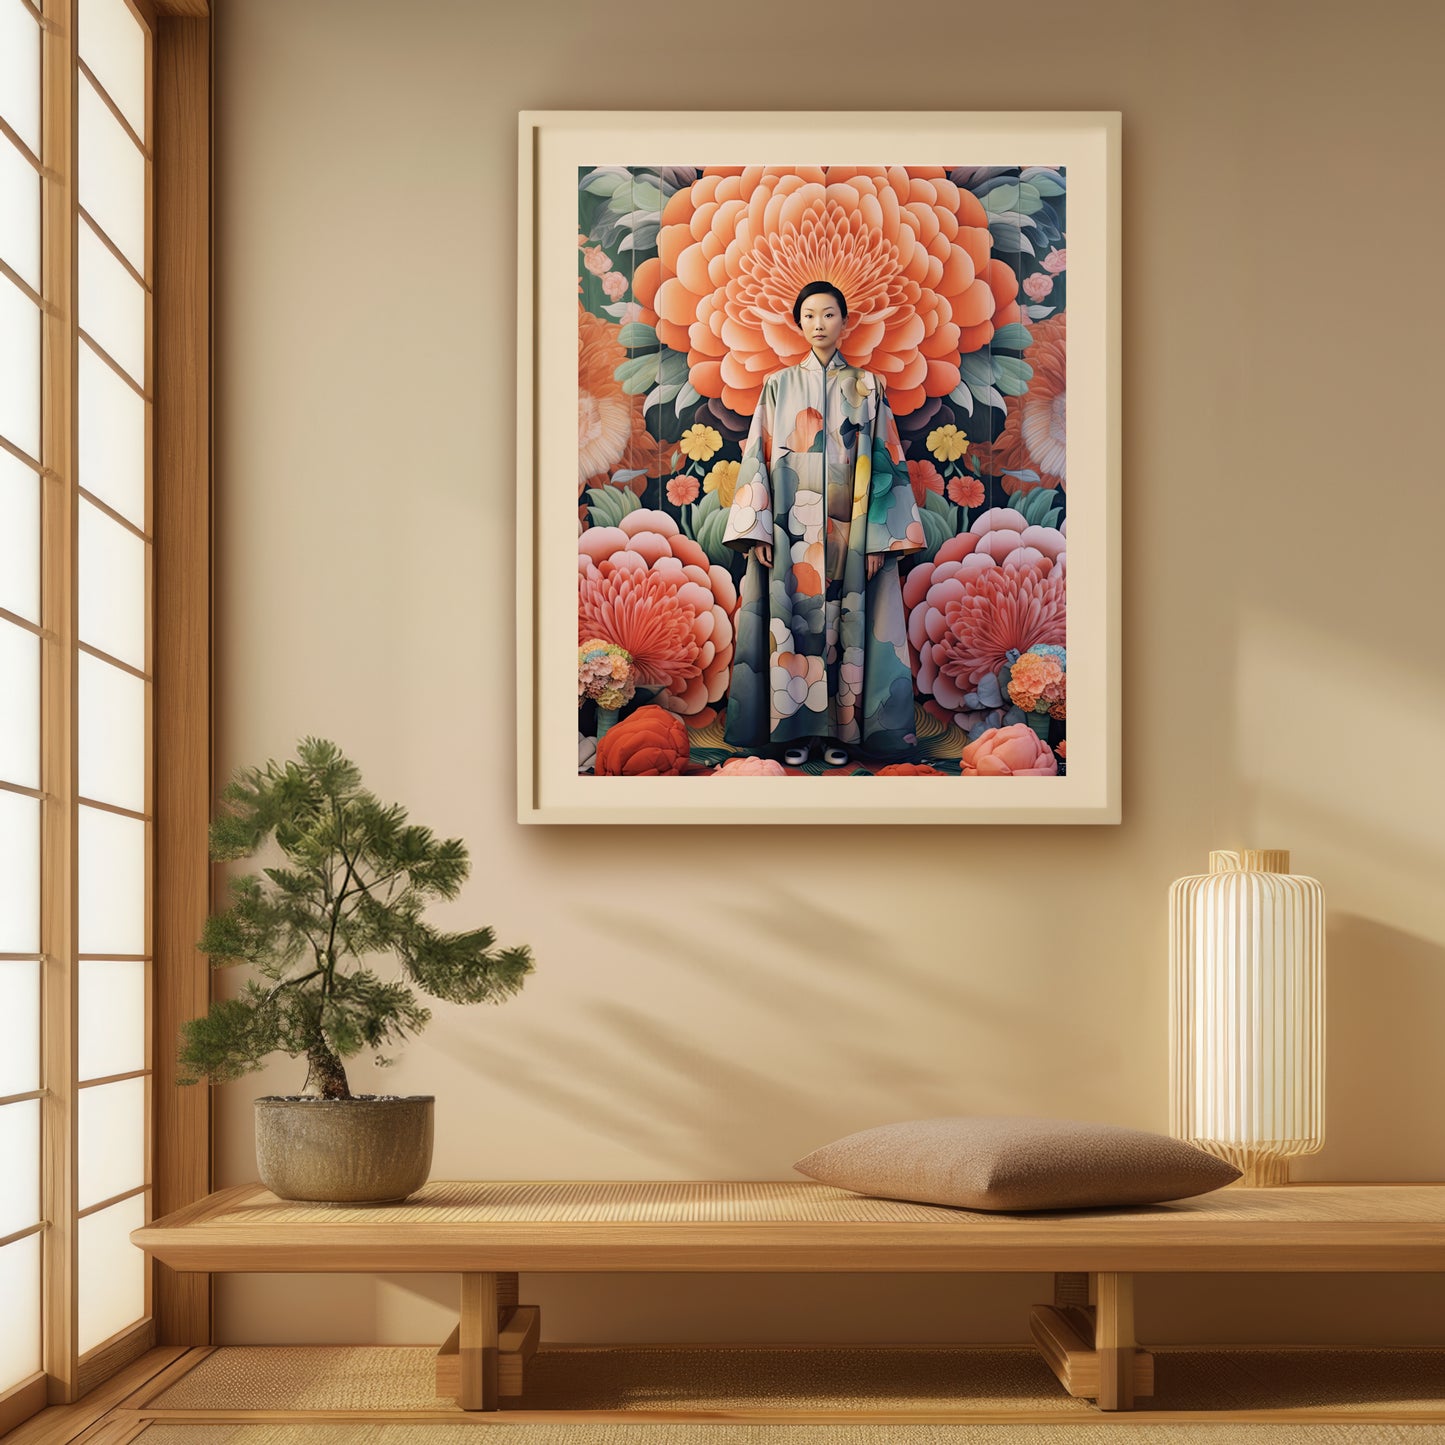 Art print showcasing a woman in a traditional kimono with vibrant floral patterns, surrounded by large, richly colored flowers in shades of orange and pink. This fine art print captures a timeless, elegant scene.